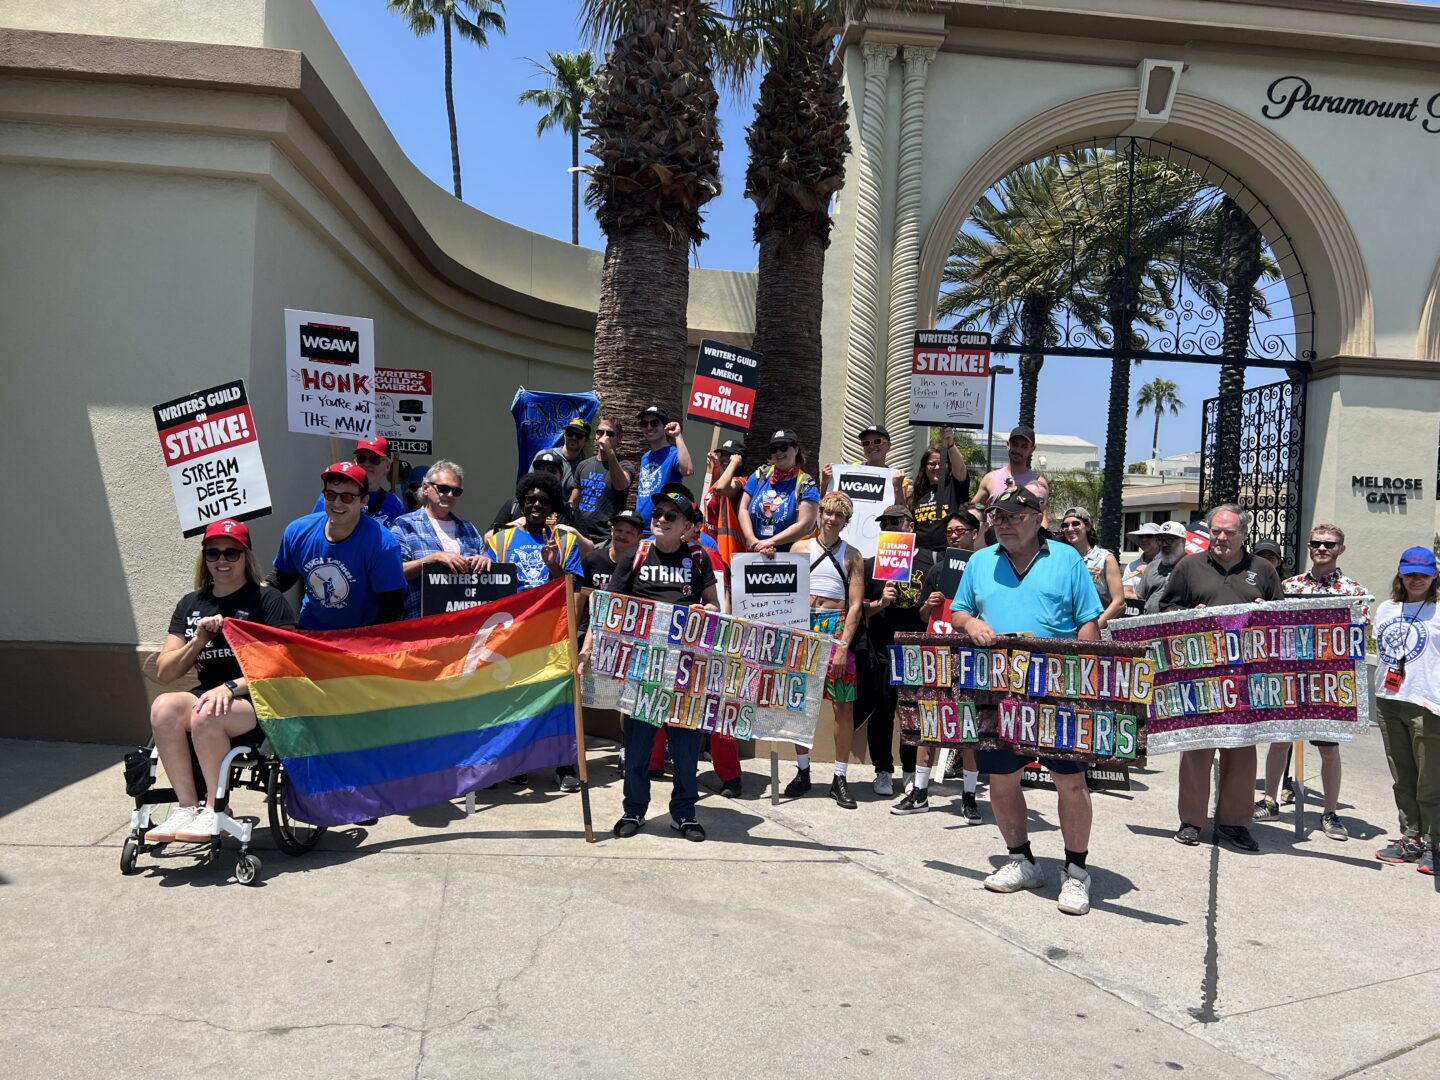 People striking in front of Paramount Studios carrying signs that say "LGBT For Striking WGA Workers" and "WGA" signs